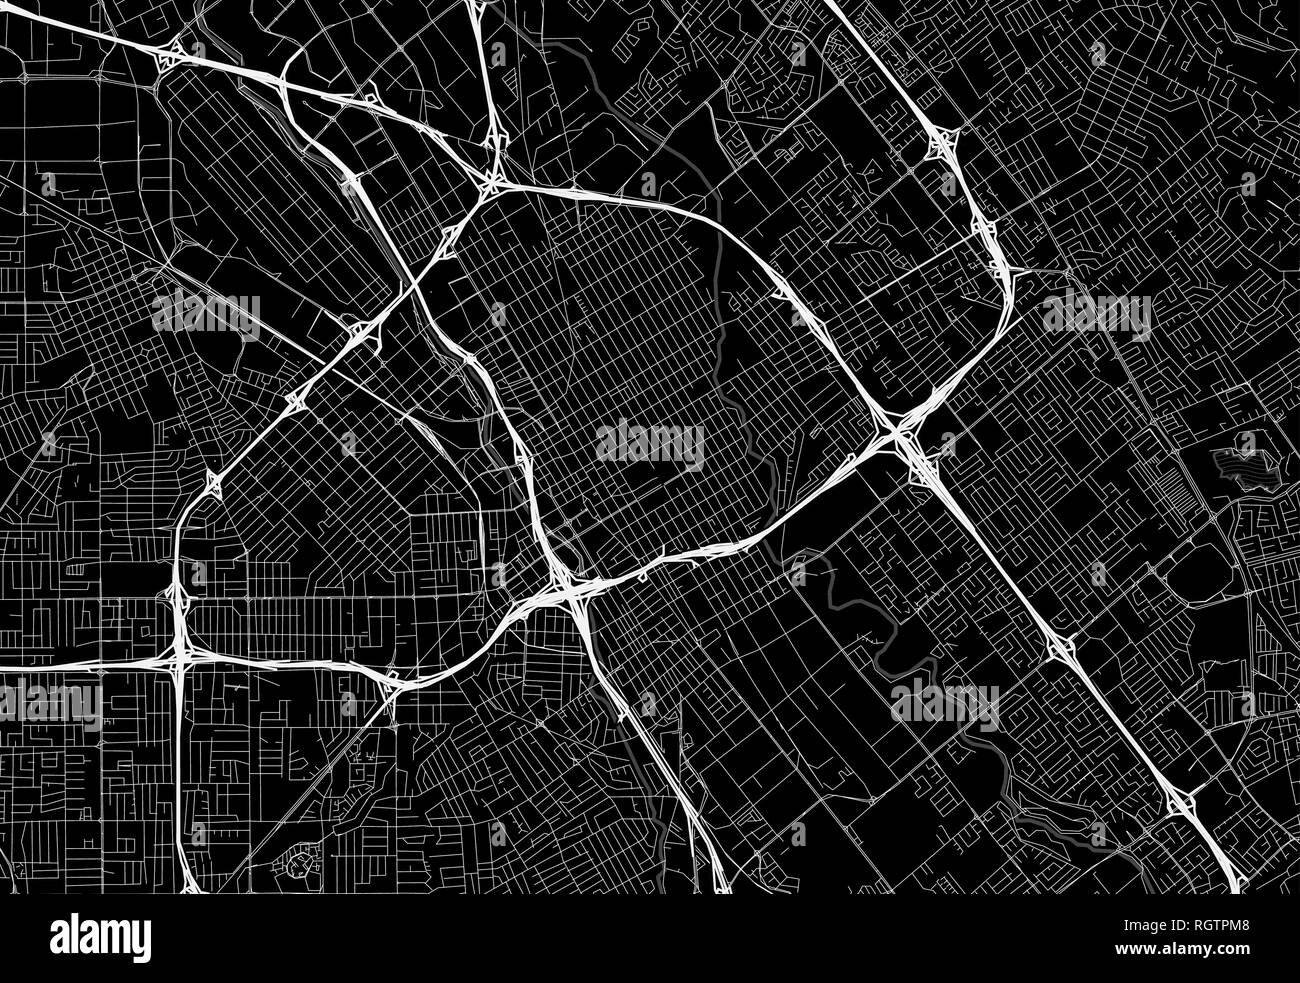 Black map of downtown San Jose, U.S.A. This vector artmap is created as a decorative background or a unique travel sign. Stock Vector